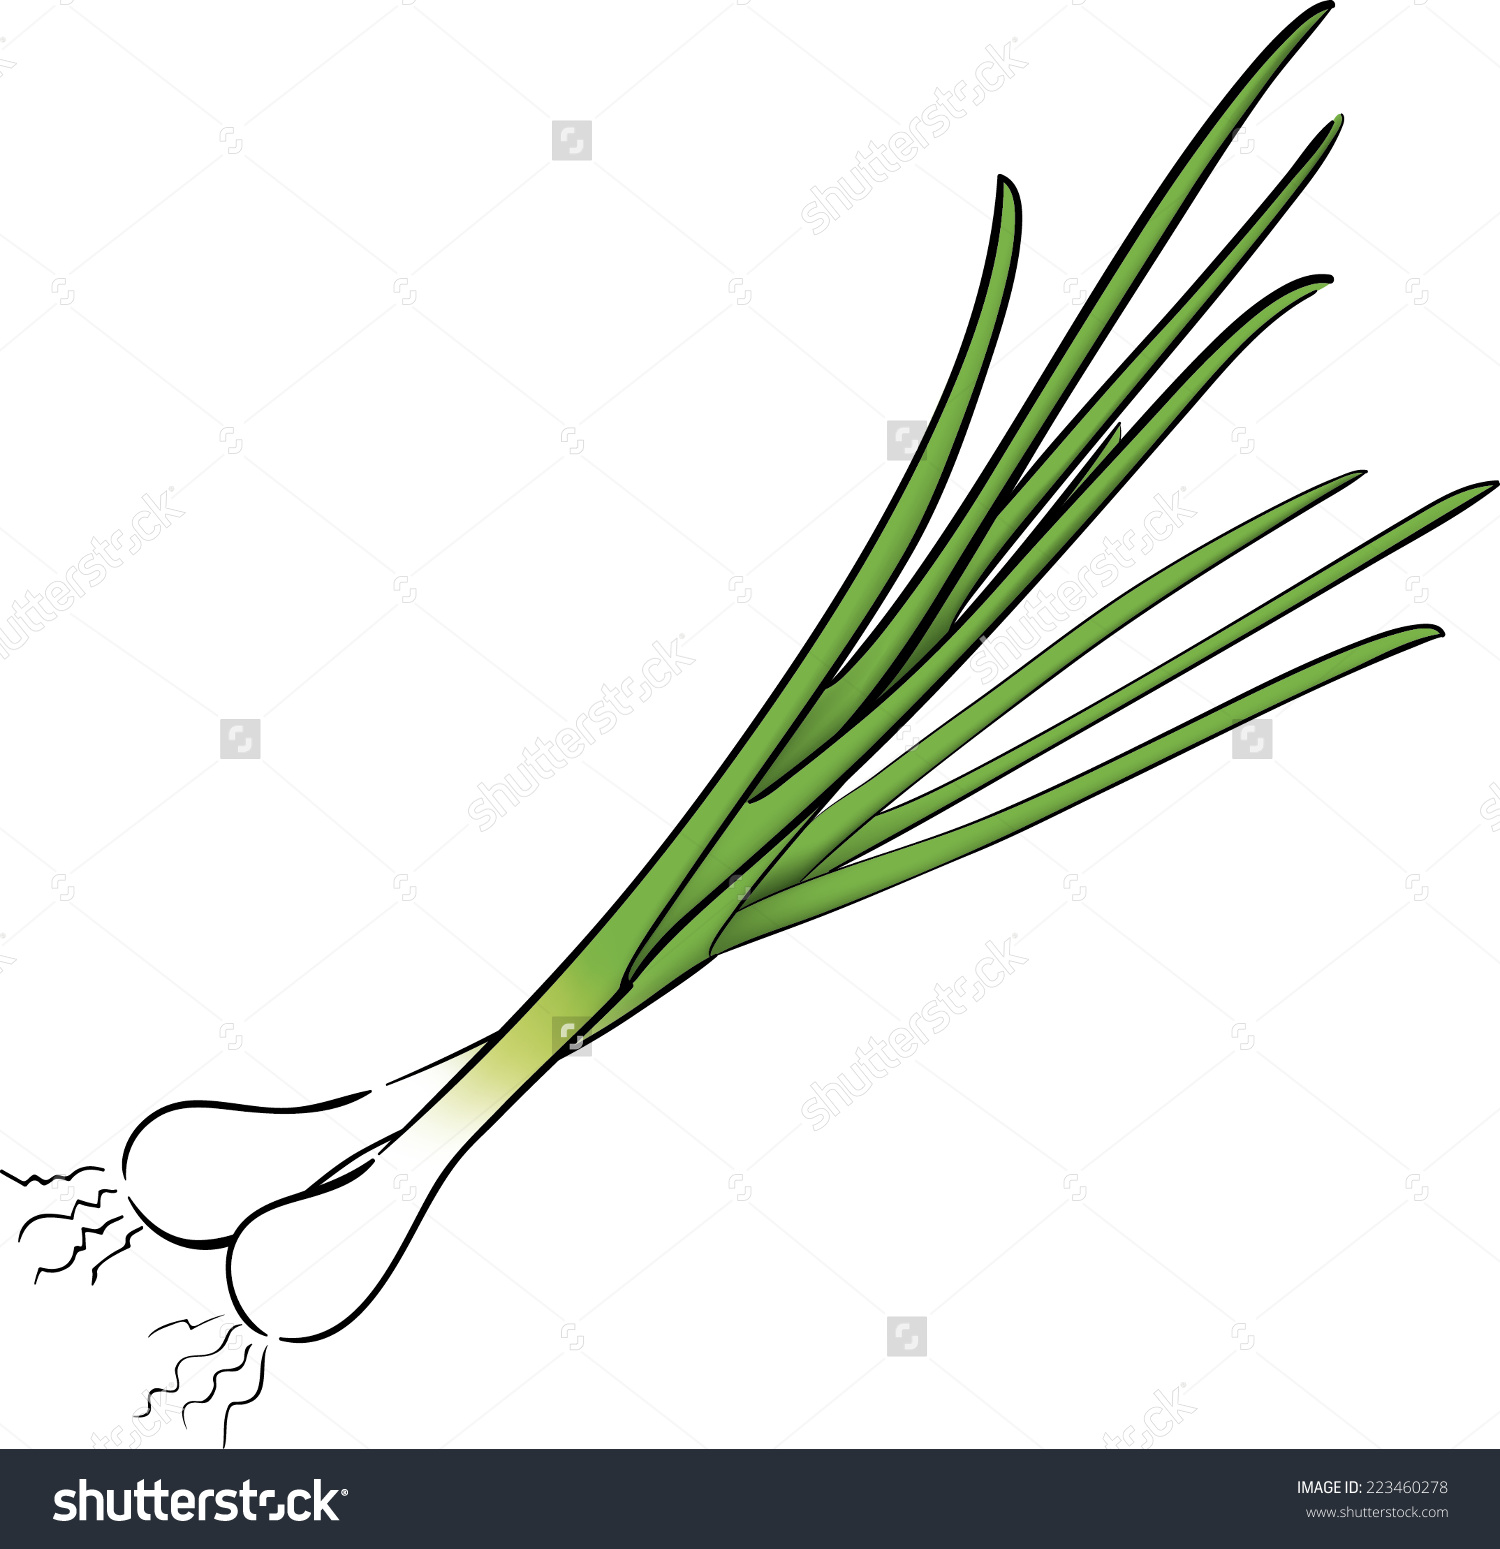 spring onion clipart - photo #12